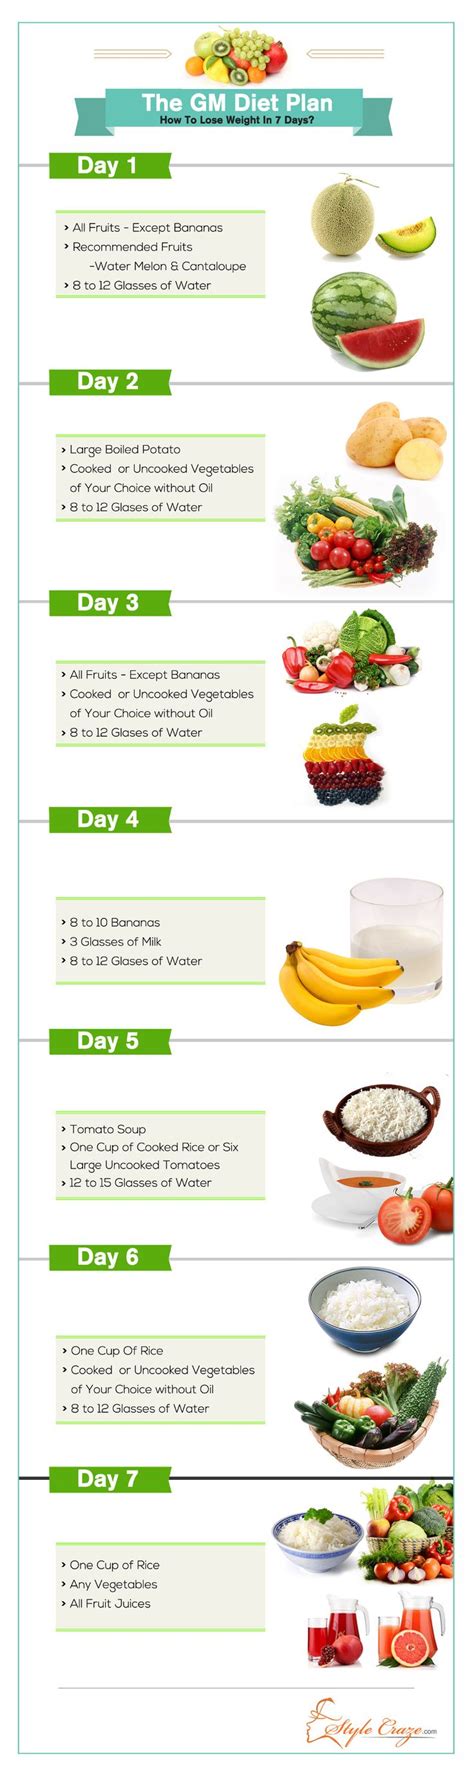 The Gm Diet Plan How To Lose Weight In Just 7 Days